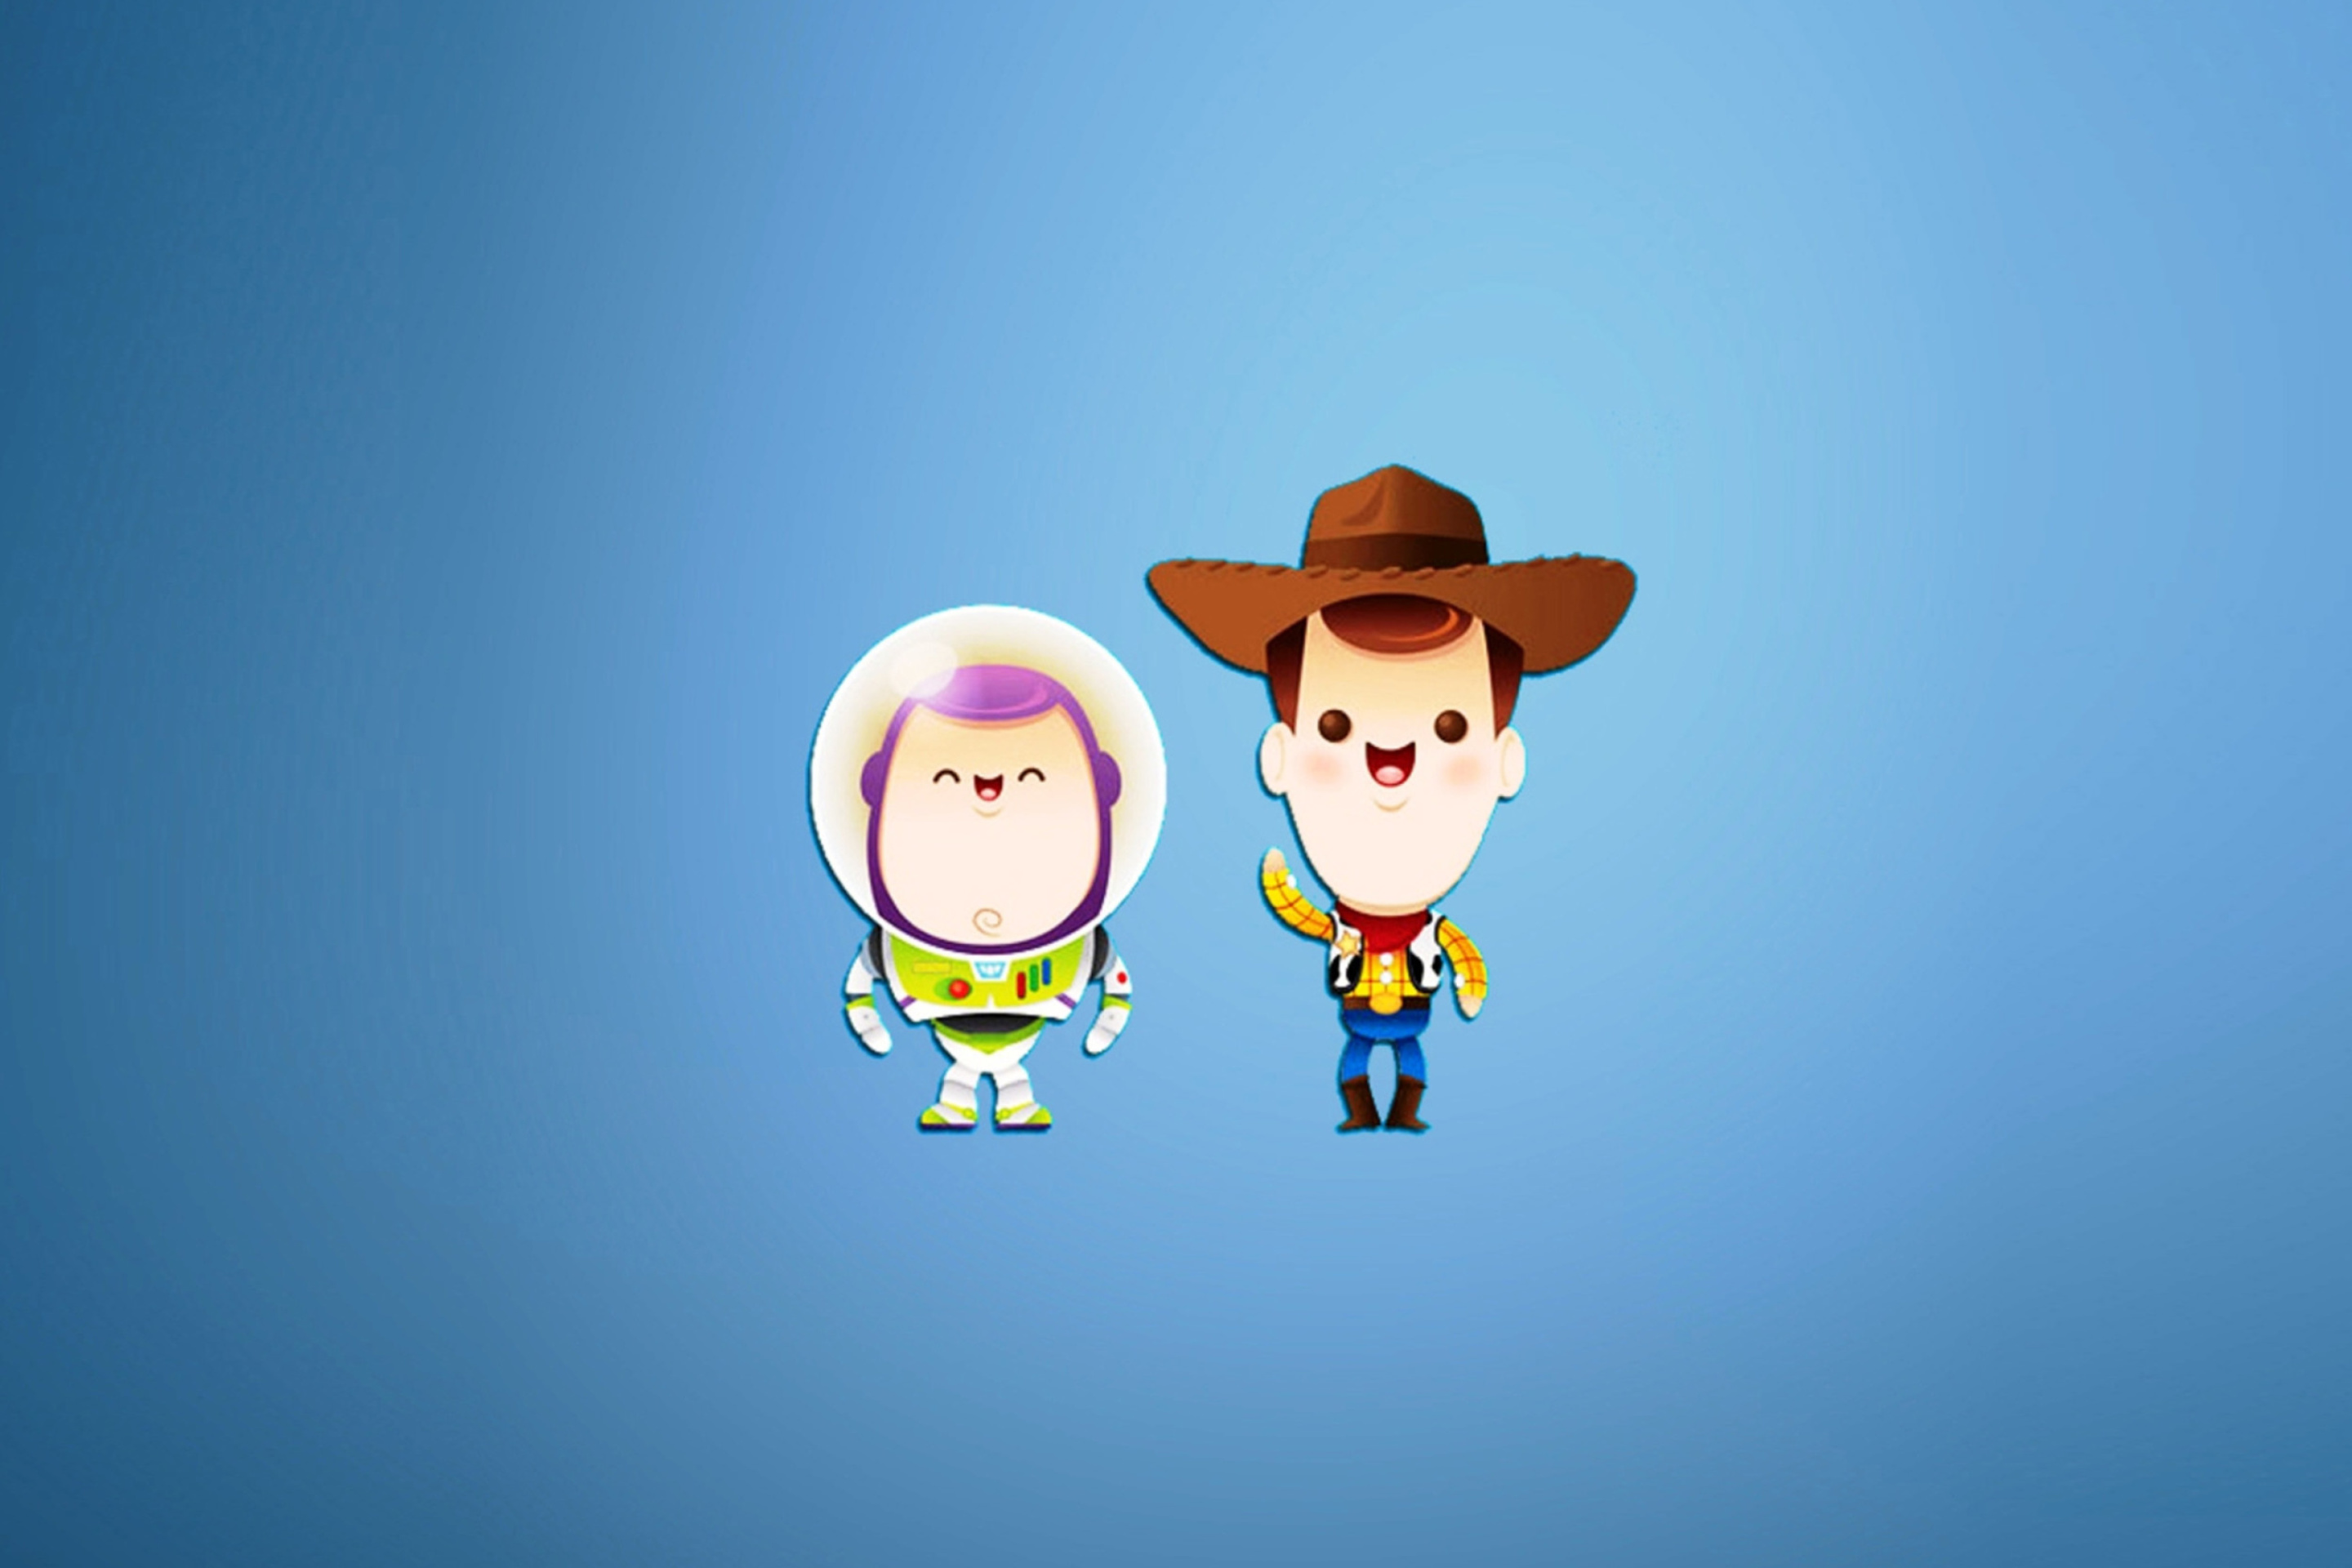 Buzz and Woody in Toy Story wallpaper 2880x1920